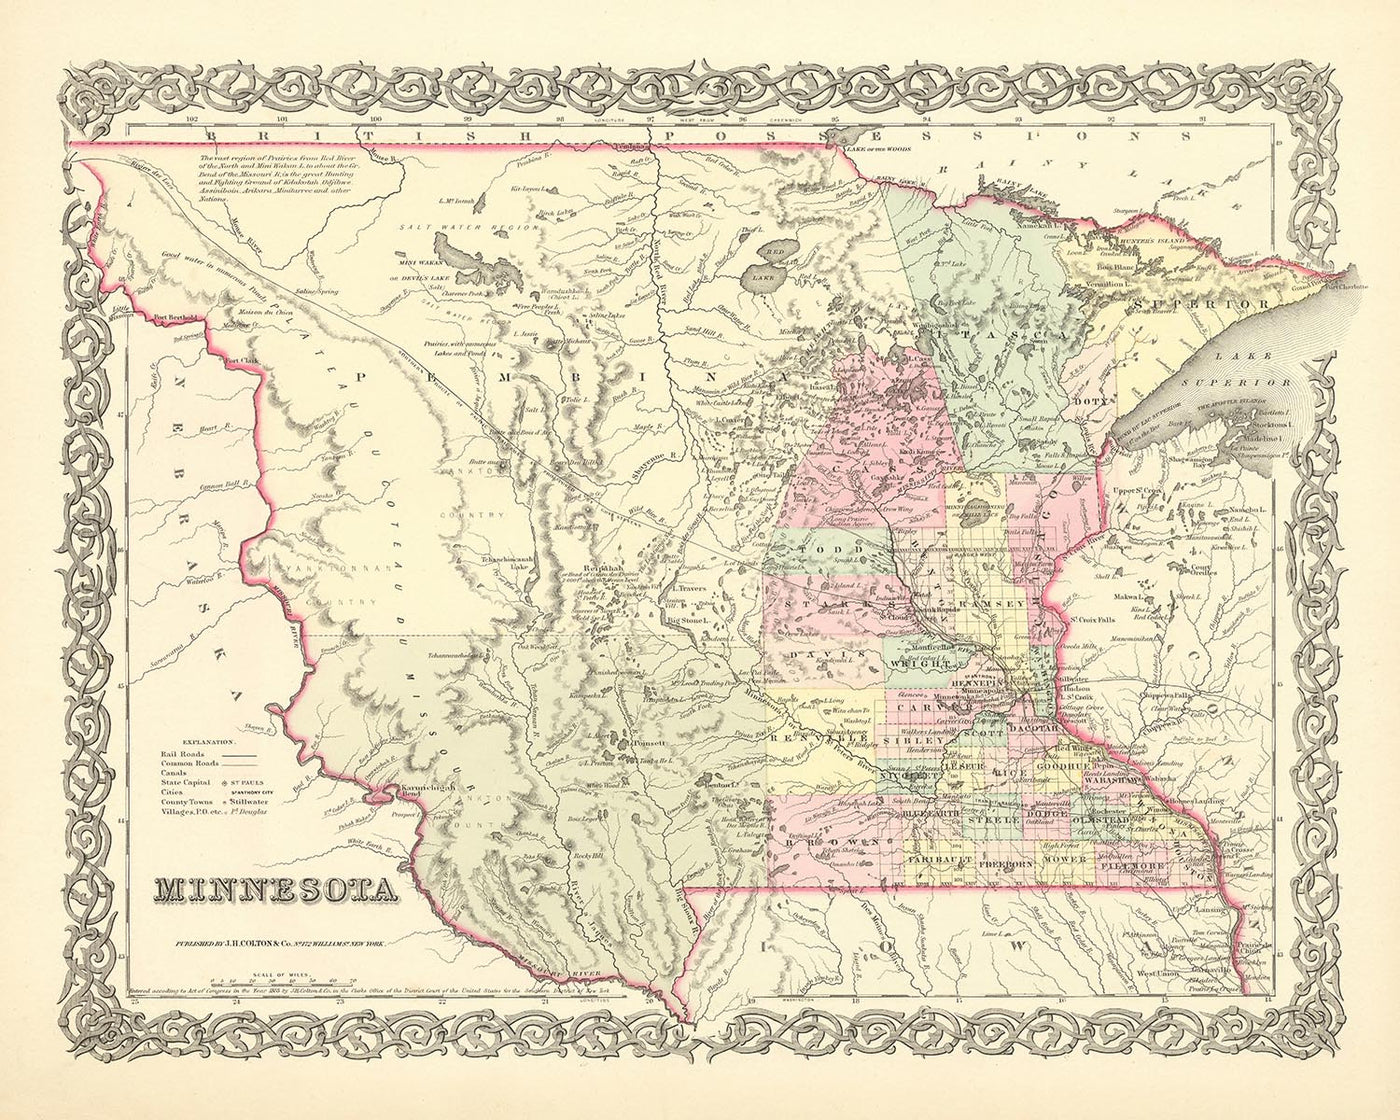 Old Map of Minnesota by J. H. Colton, 1856: St. Paul, St. Anthony, Stillwater, Mendota, and Wabasha